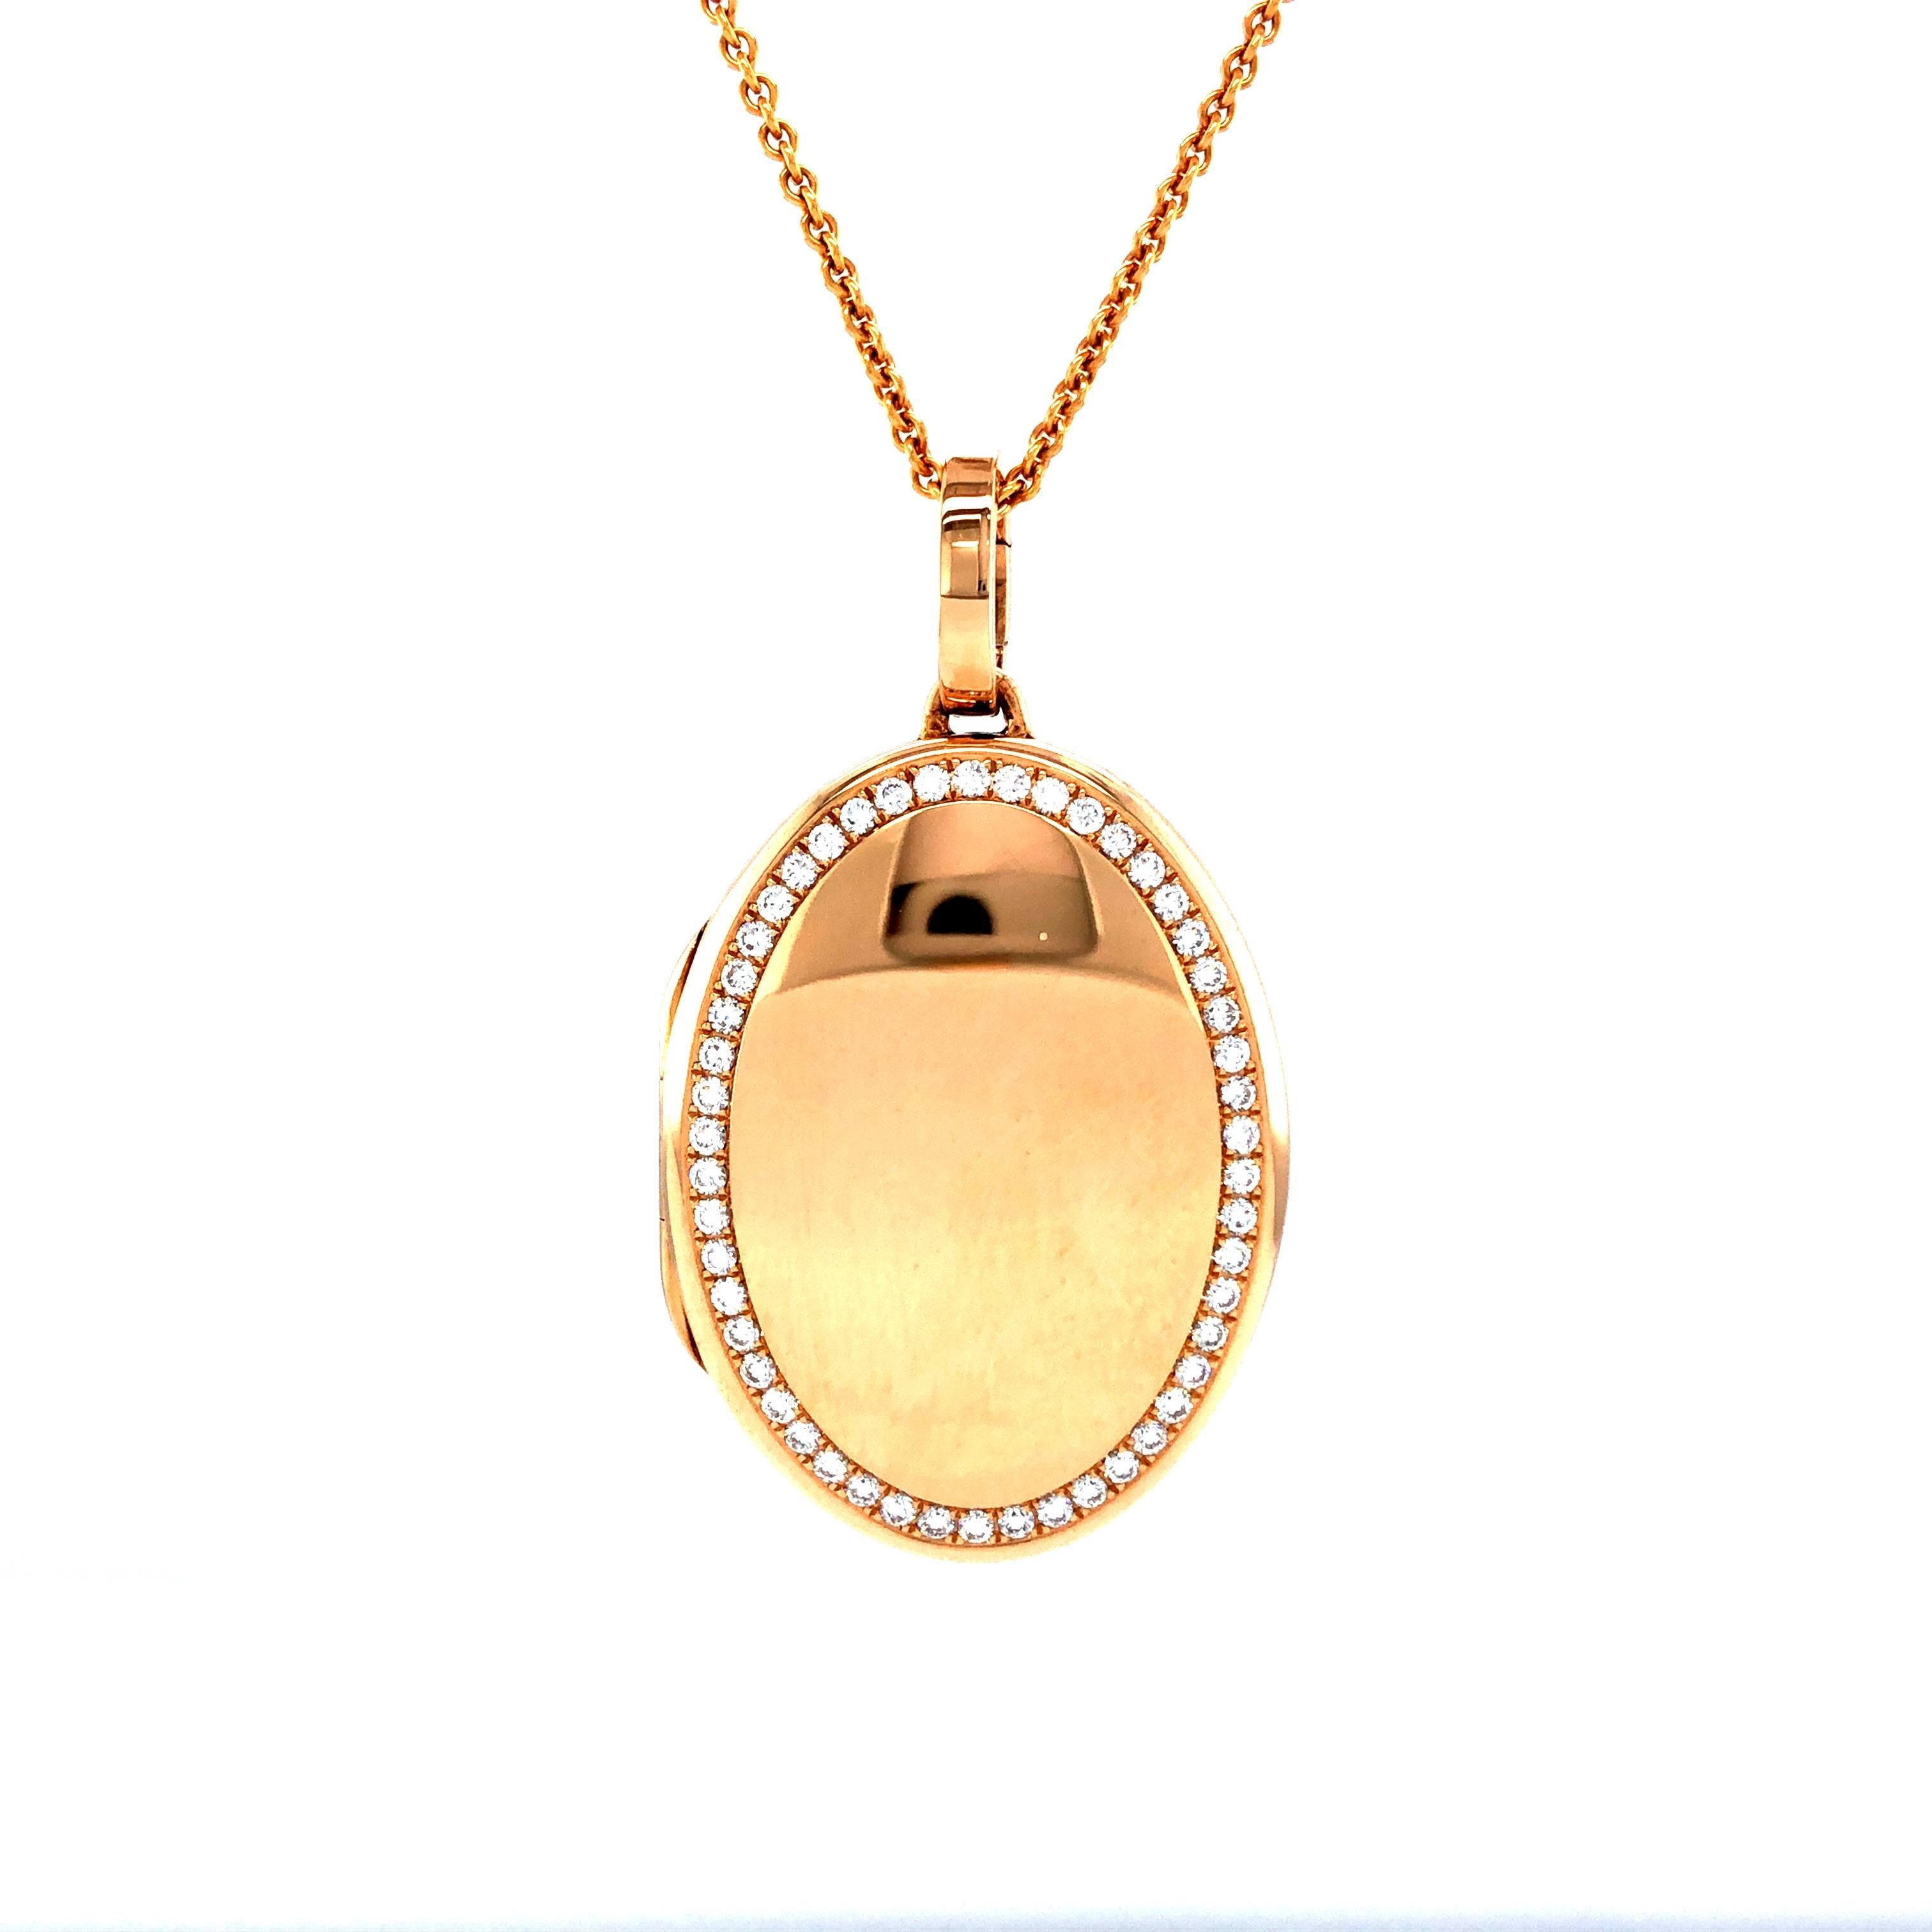 Victor Mayer customizable oval polished pendant locket necklace 18k rose gold, 50 diamonds, total 0.61 ct H VS brilliant cut, measurements app. 35.0 mm x 26.0 mm

About the creator Victor Mayer
Victor Mayer is internationally renowned for elegant